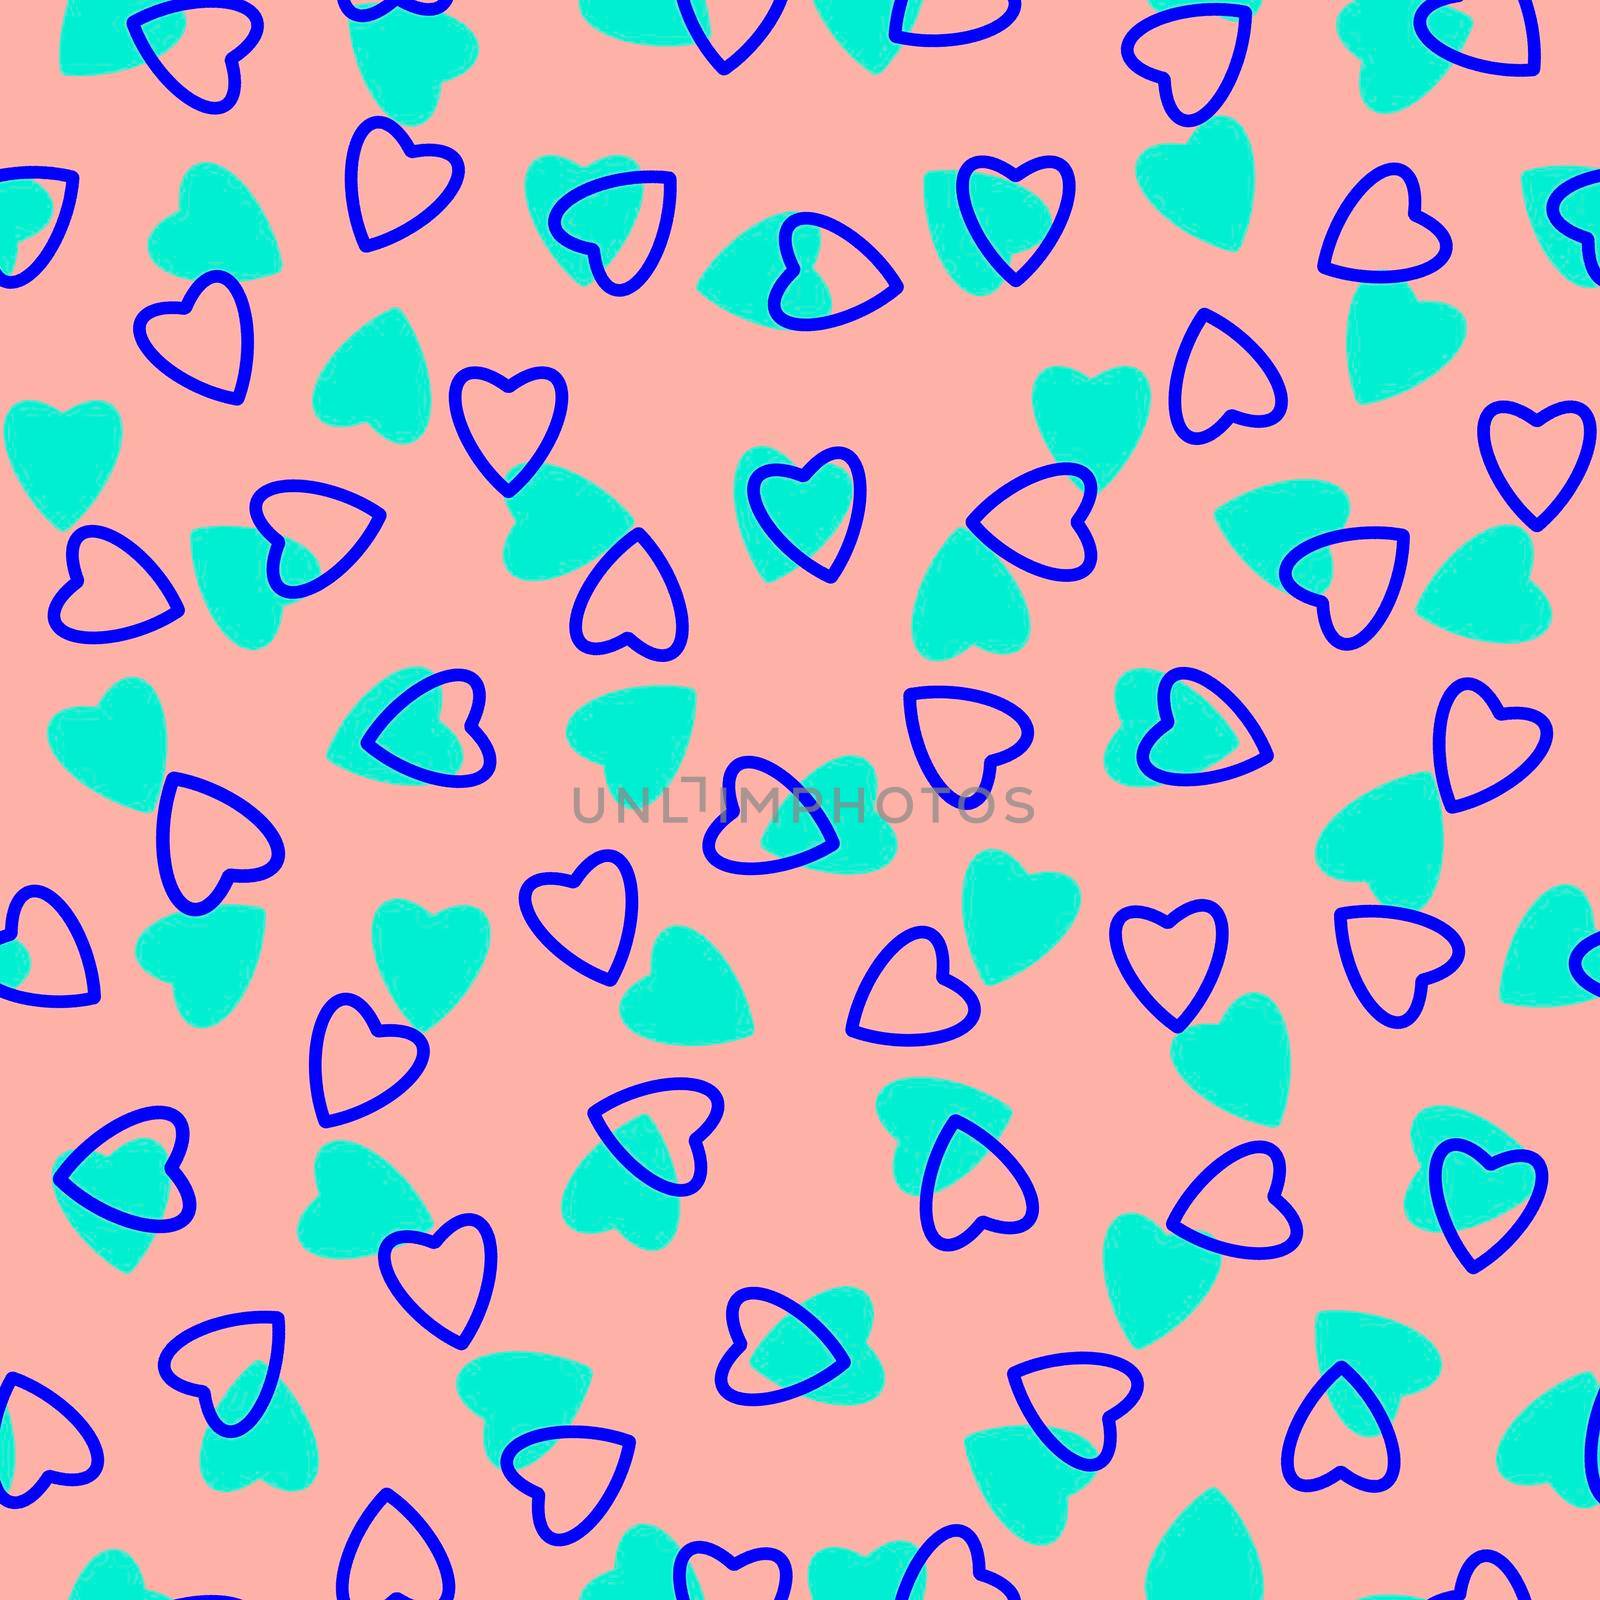 Simple hearts seamless pattern,endless chaotic texture made of tiny heart silhouettes.Valentines,mothers day background.Great for Easter,wedding,scrapbook,gift wrapping paper,textiles.Azure,blue,peach by Angelsmoon